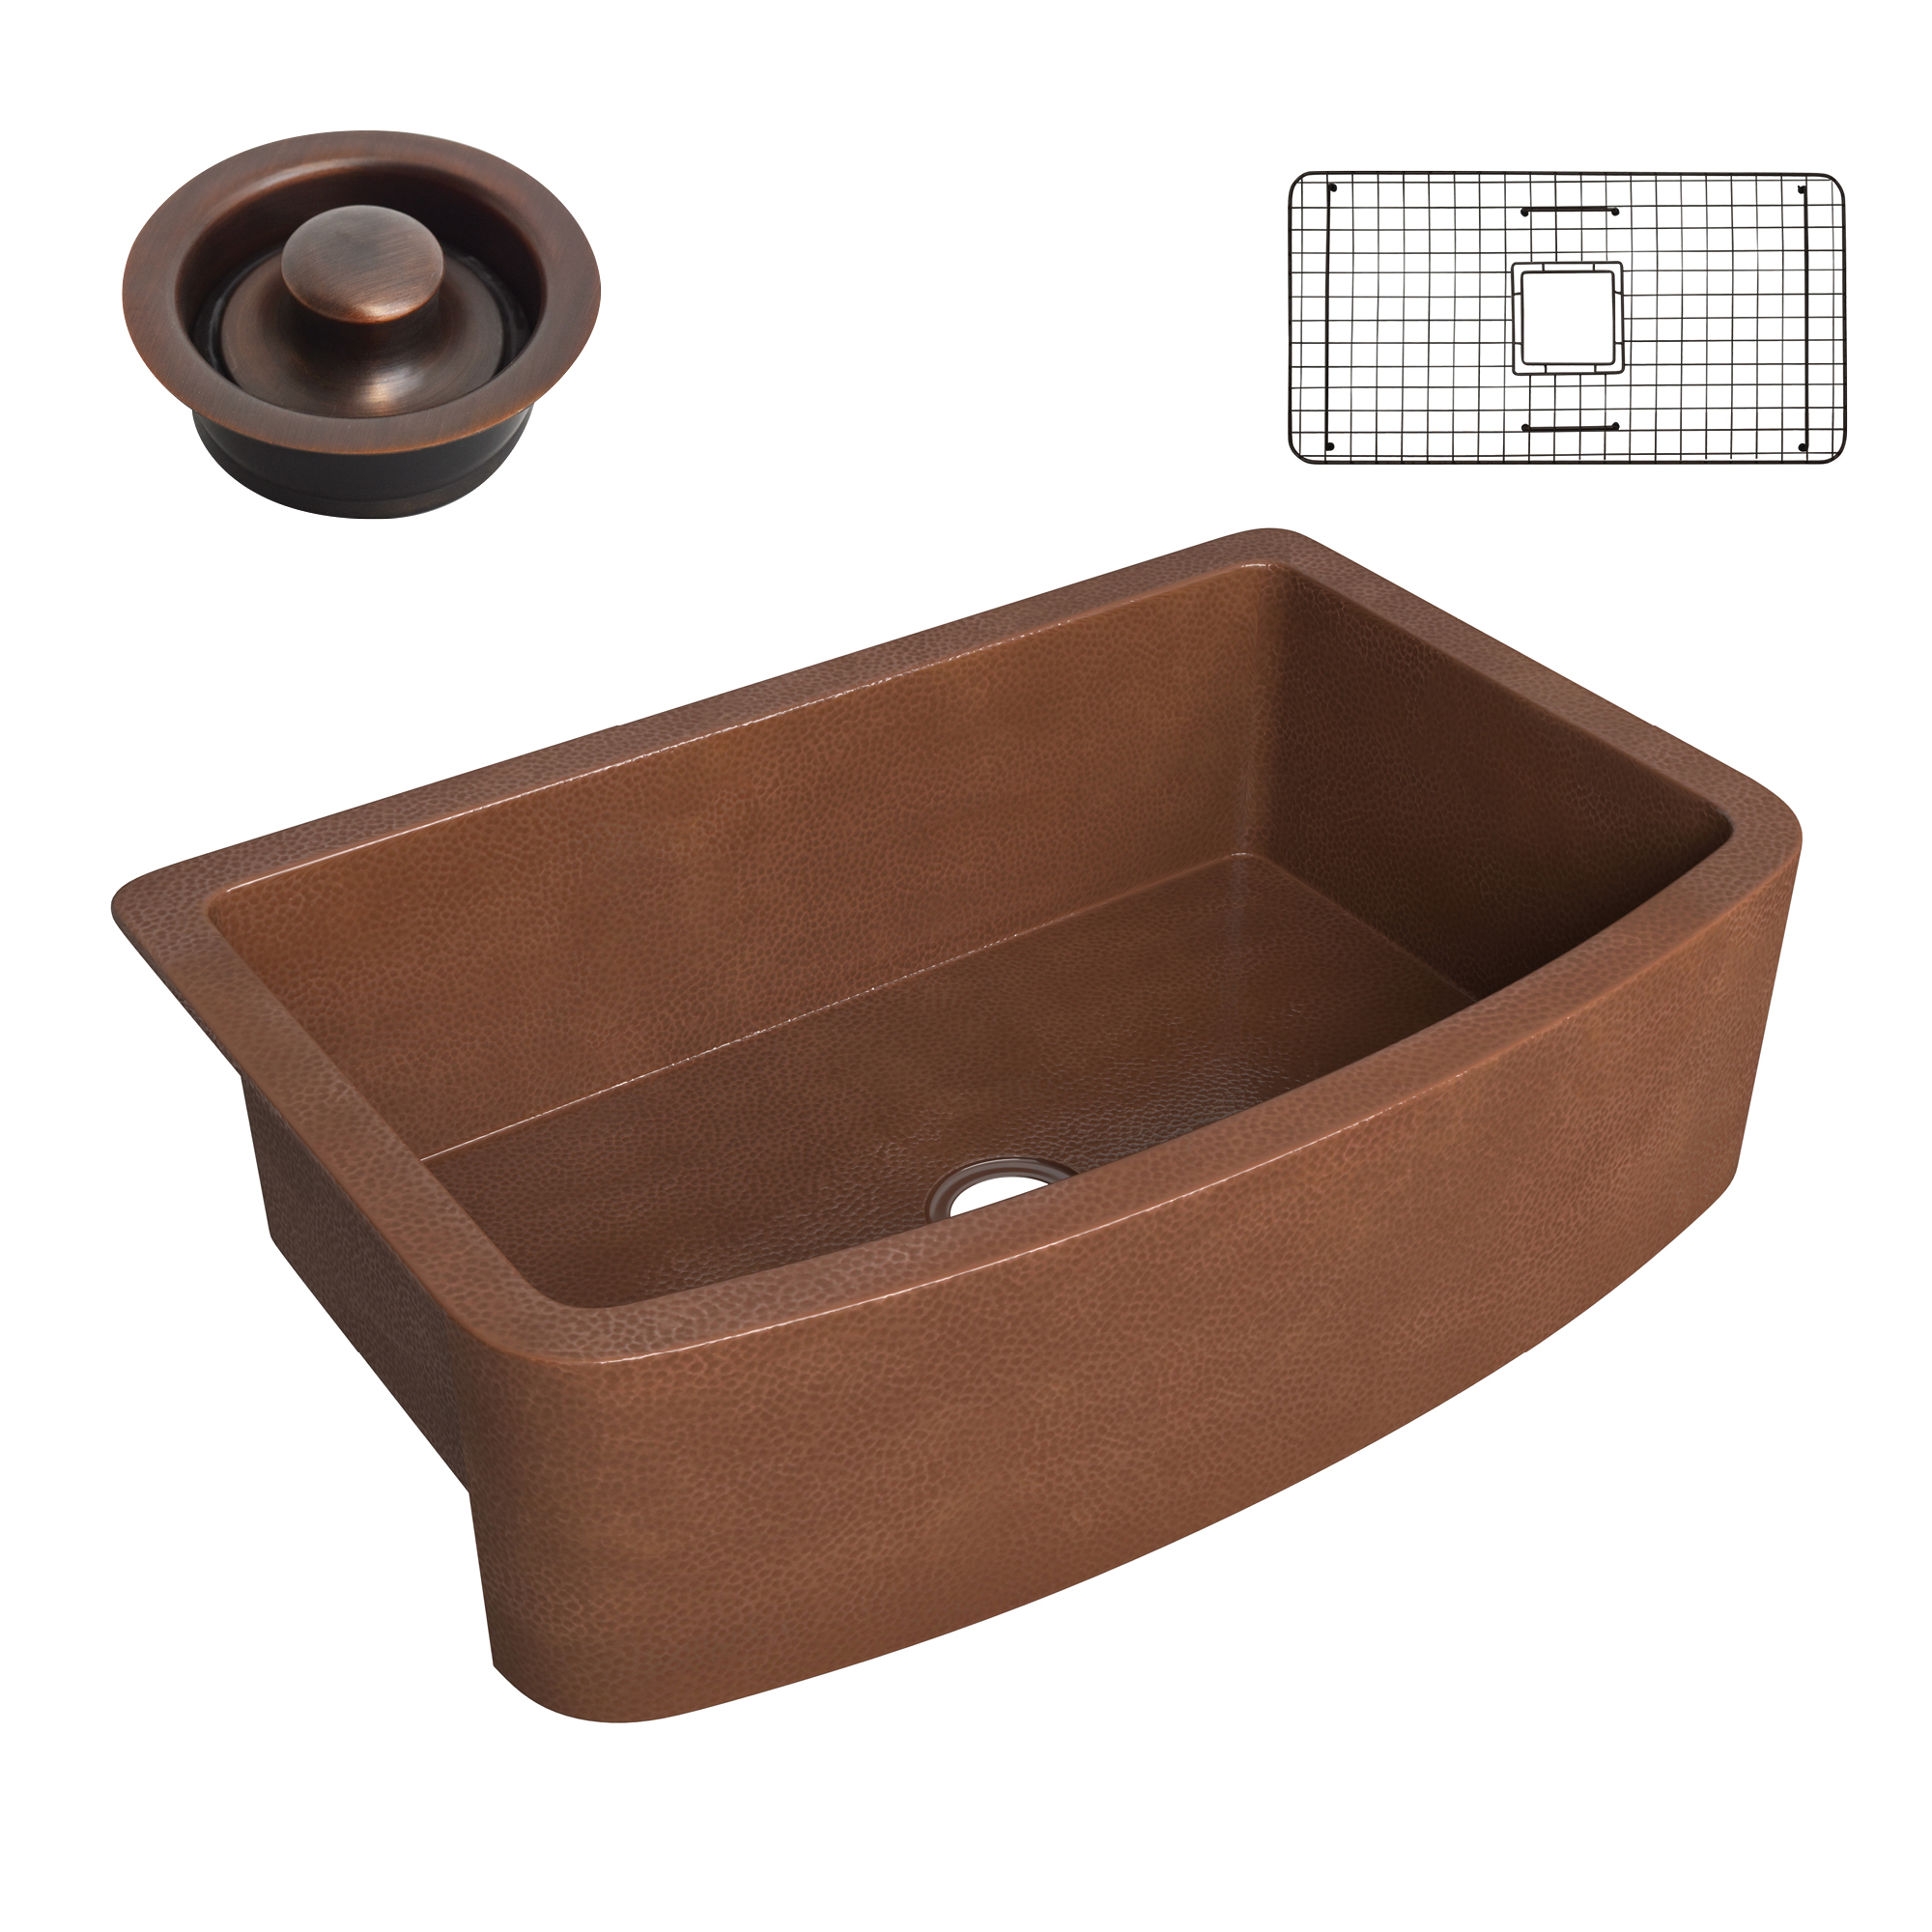 Pieria Farmhouse Handmade Copper 33 in. 0-Hole Single Bowl Kitchen Sink in Hammered Antique Copper - image 1 of 9